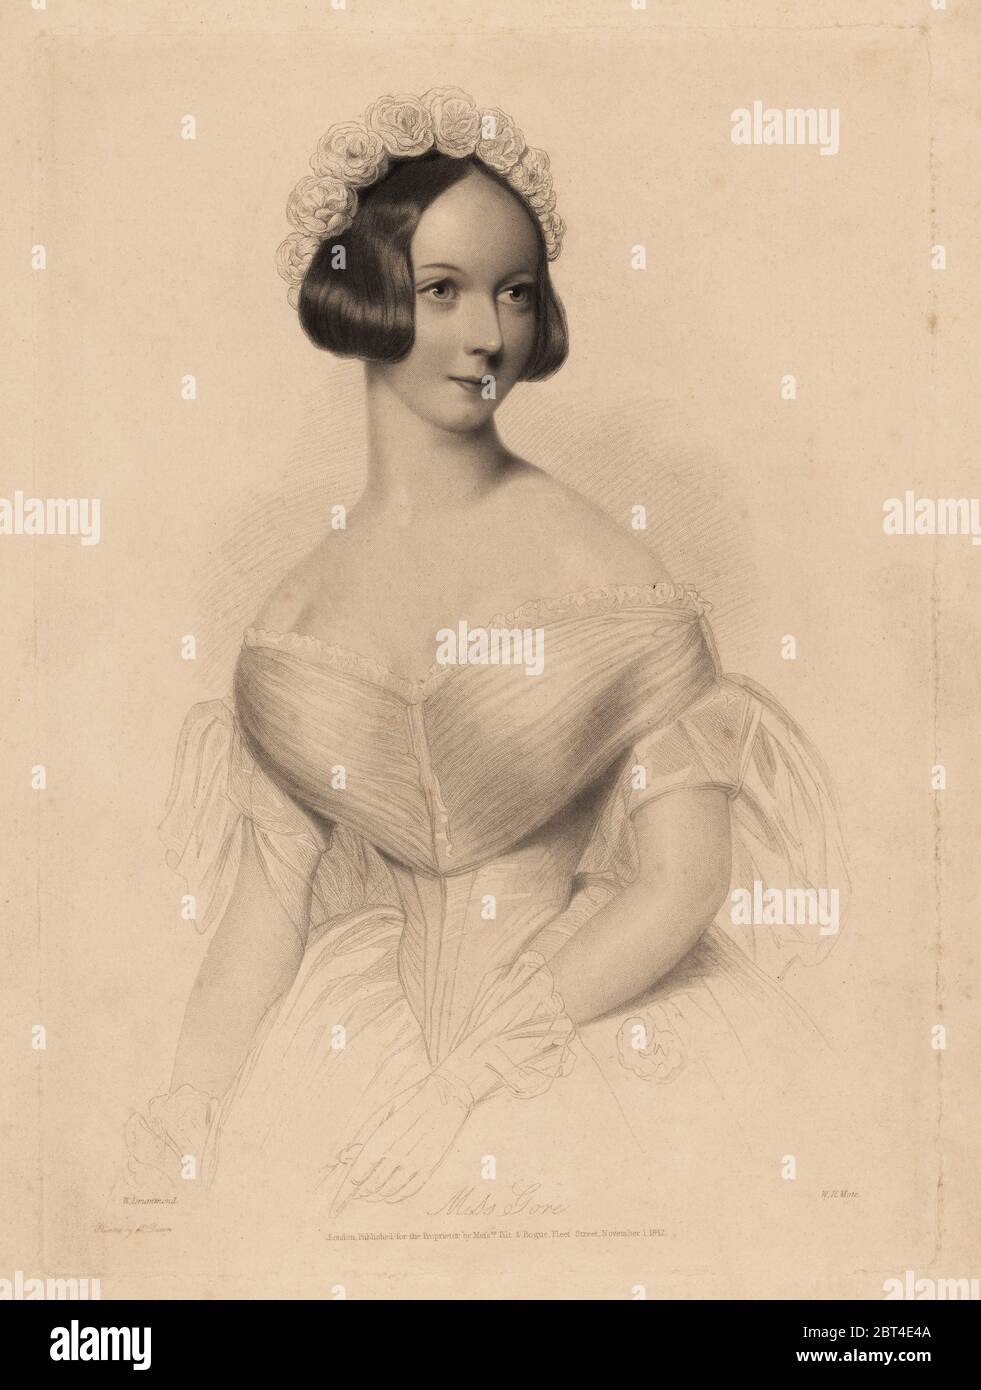 Miss Gore. In off-the-shoulder dress with tight waist, hair decorated with a garland of roses. Steel stipple engraving by William Henry Mote after an illustration by William Drummond from Charles Heaths English Pearls, or Portraits for the Boudoir, Tilt and Bogue, London, 1843. Stock Photo